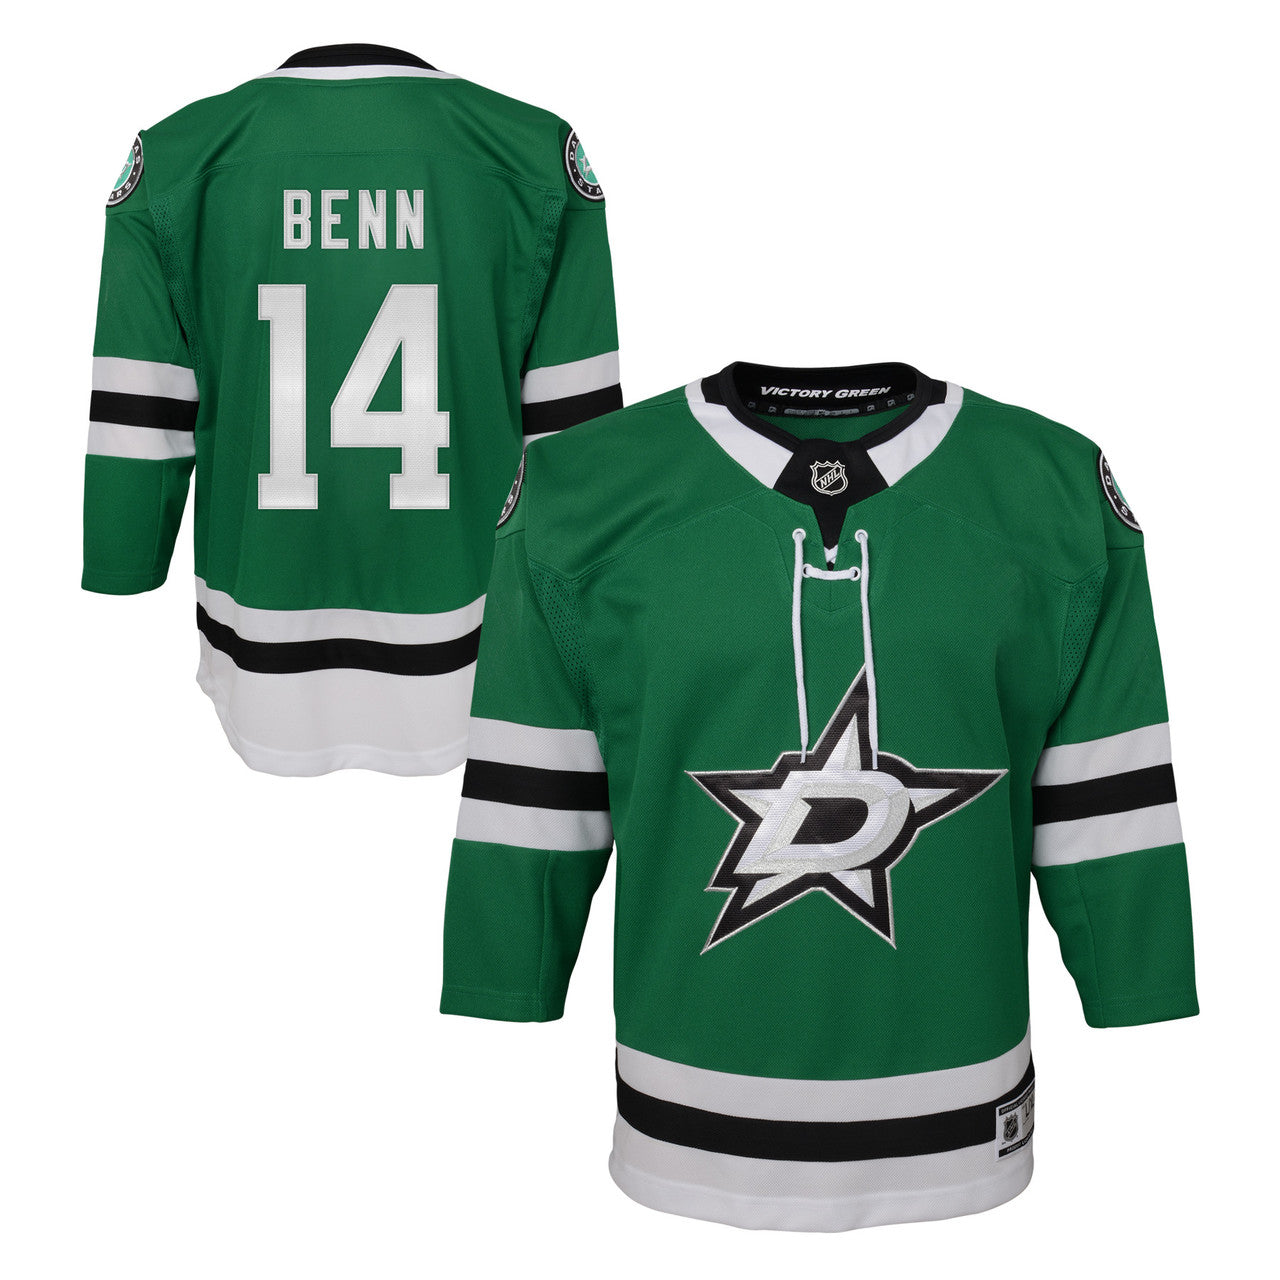 Dallas Stars Youth Outerstuff Jamie Benn Premier Jersey in Green -front and Back View